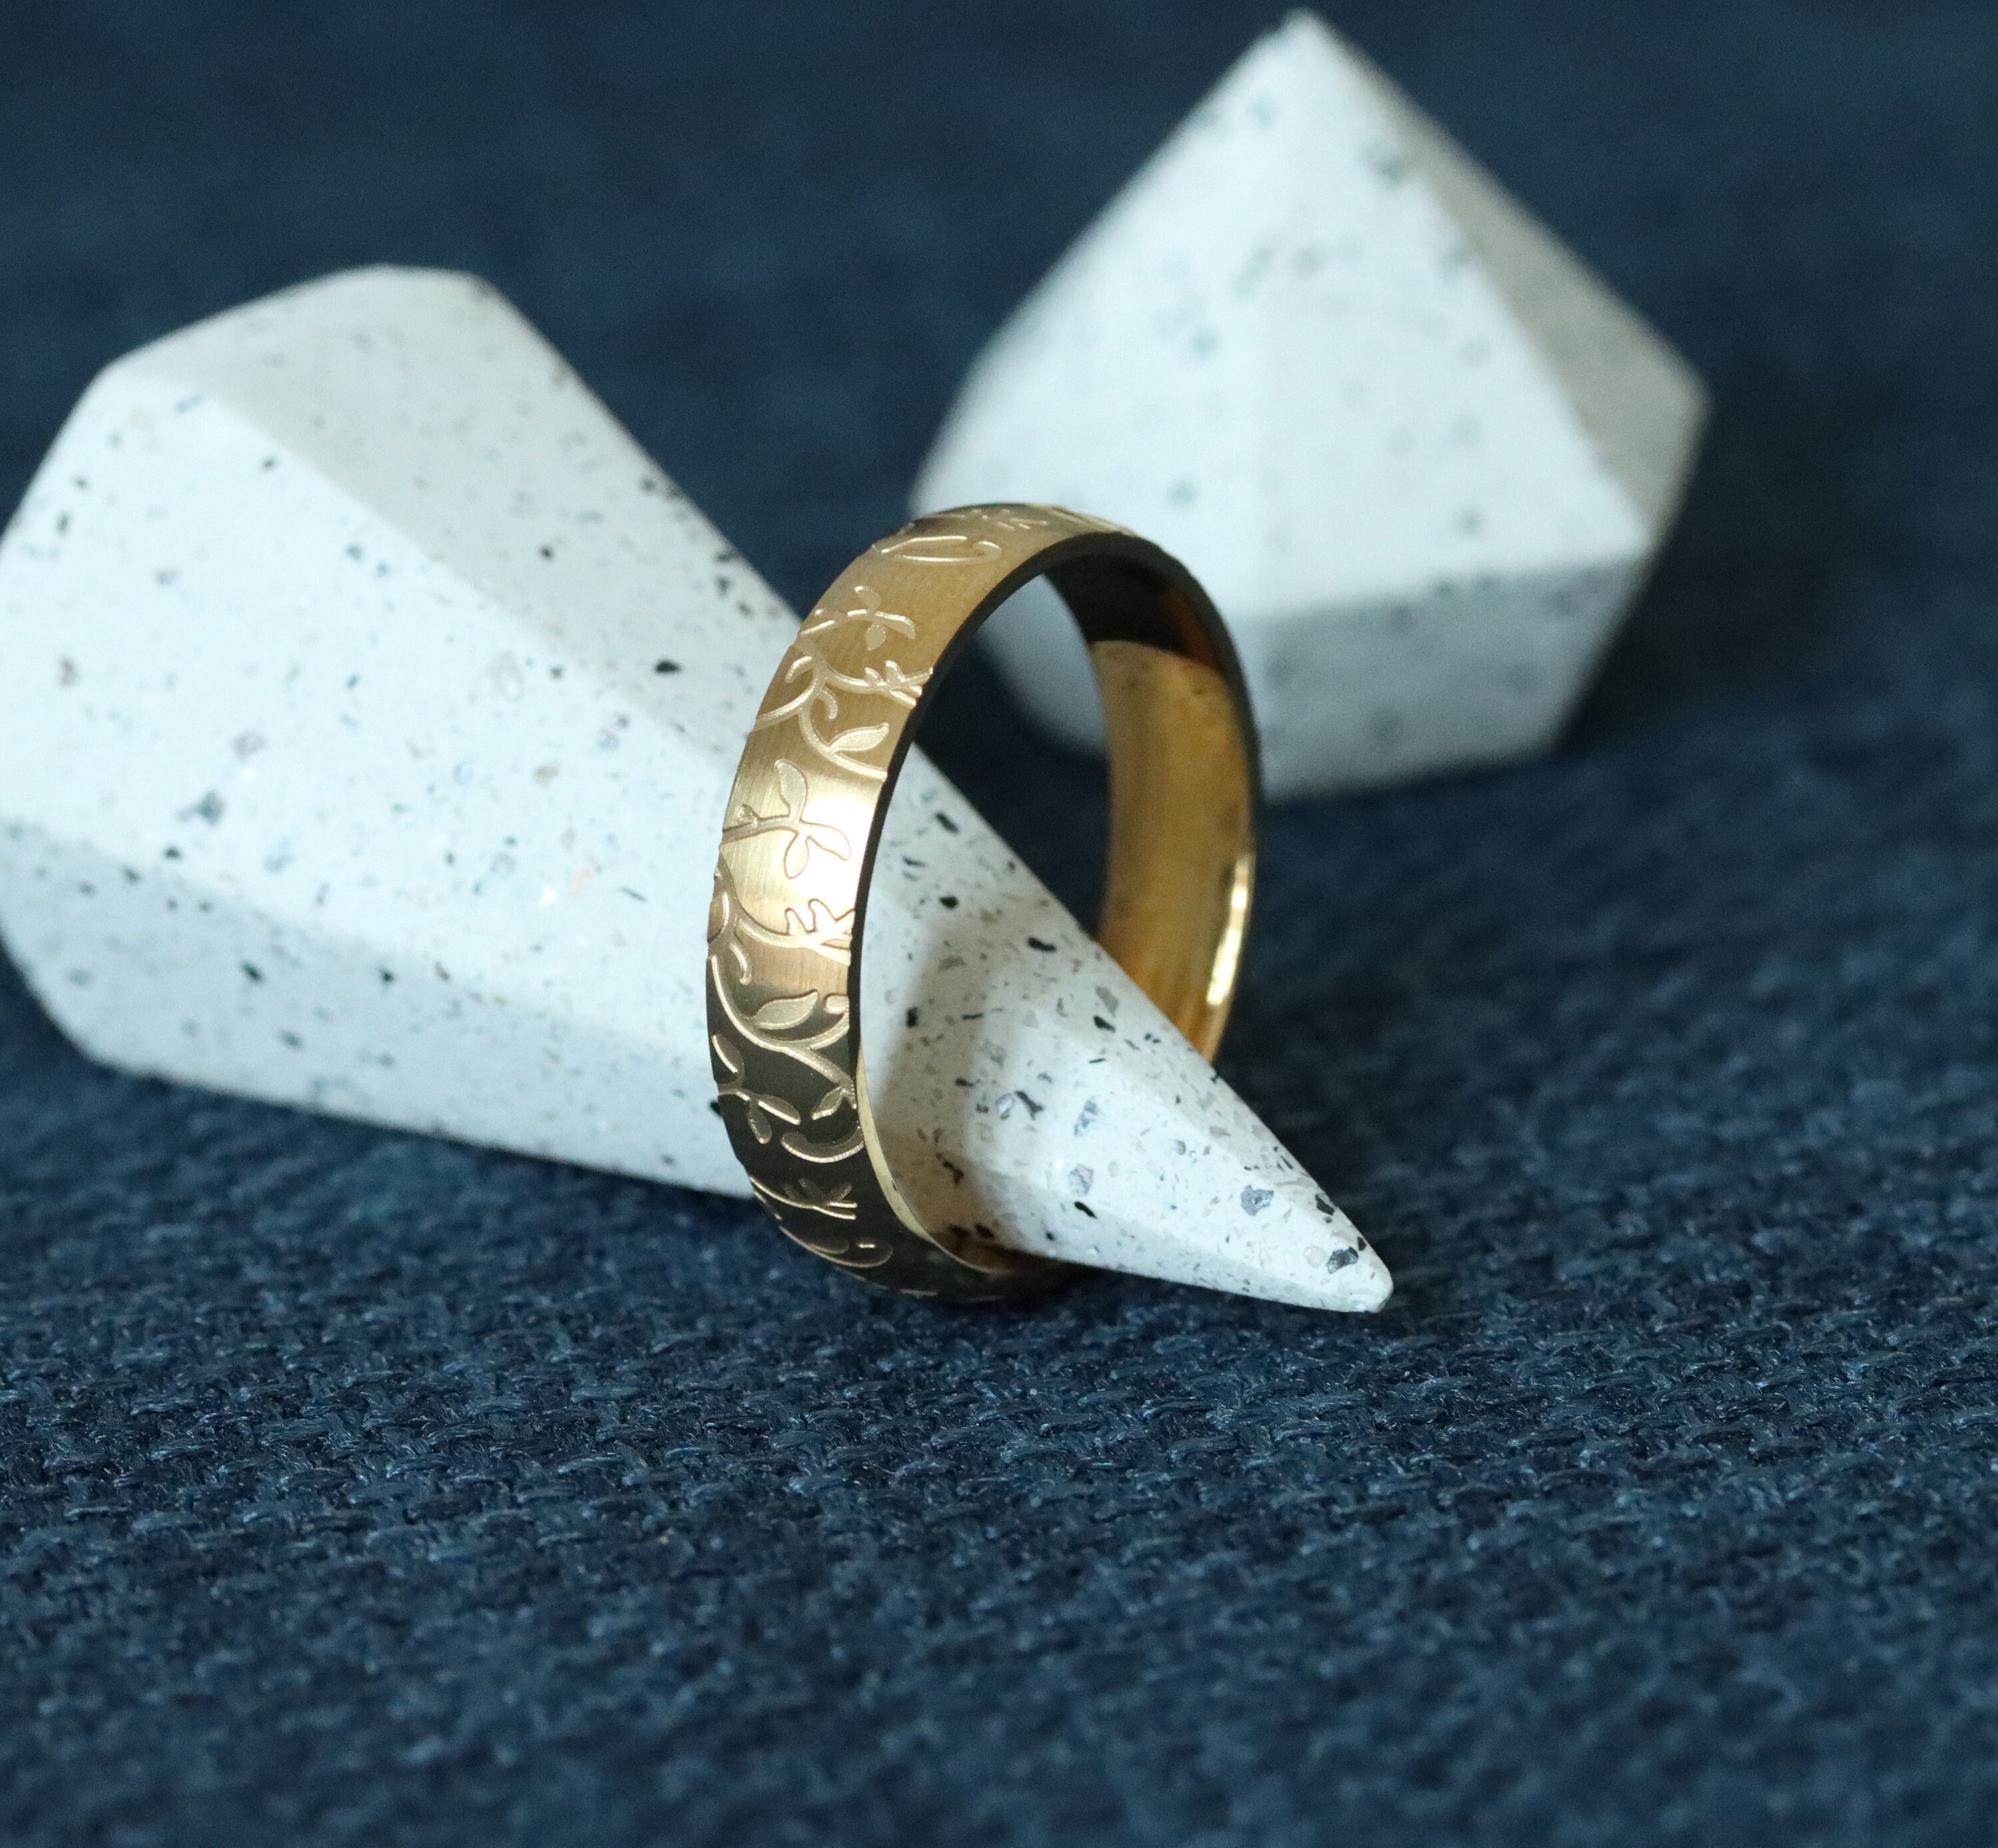 How to make a custom engagement ring | by Alex Cox | Medium